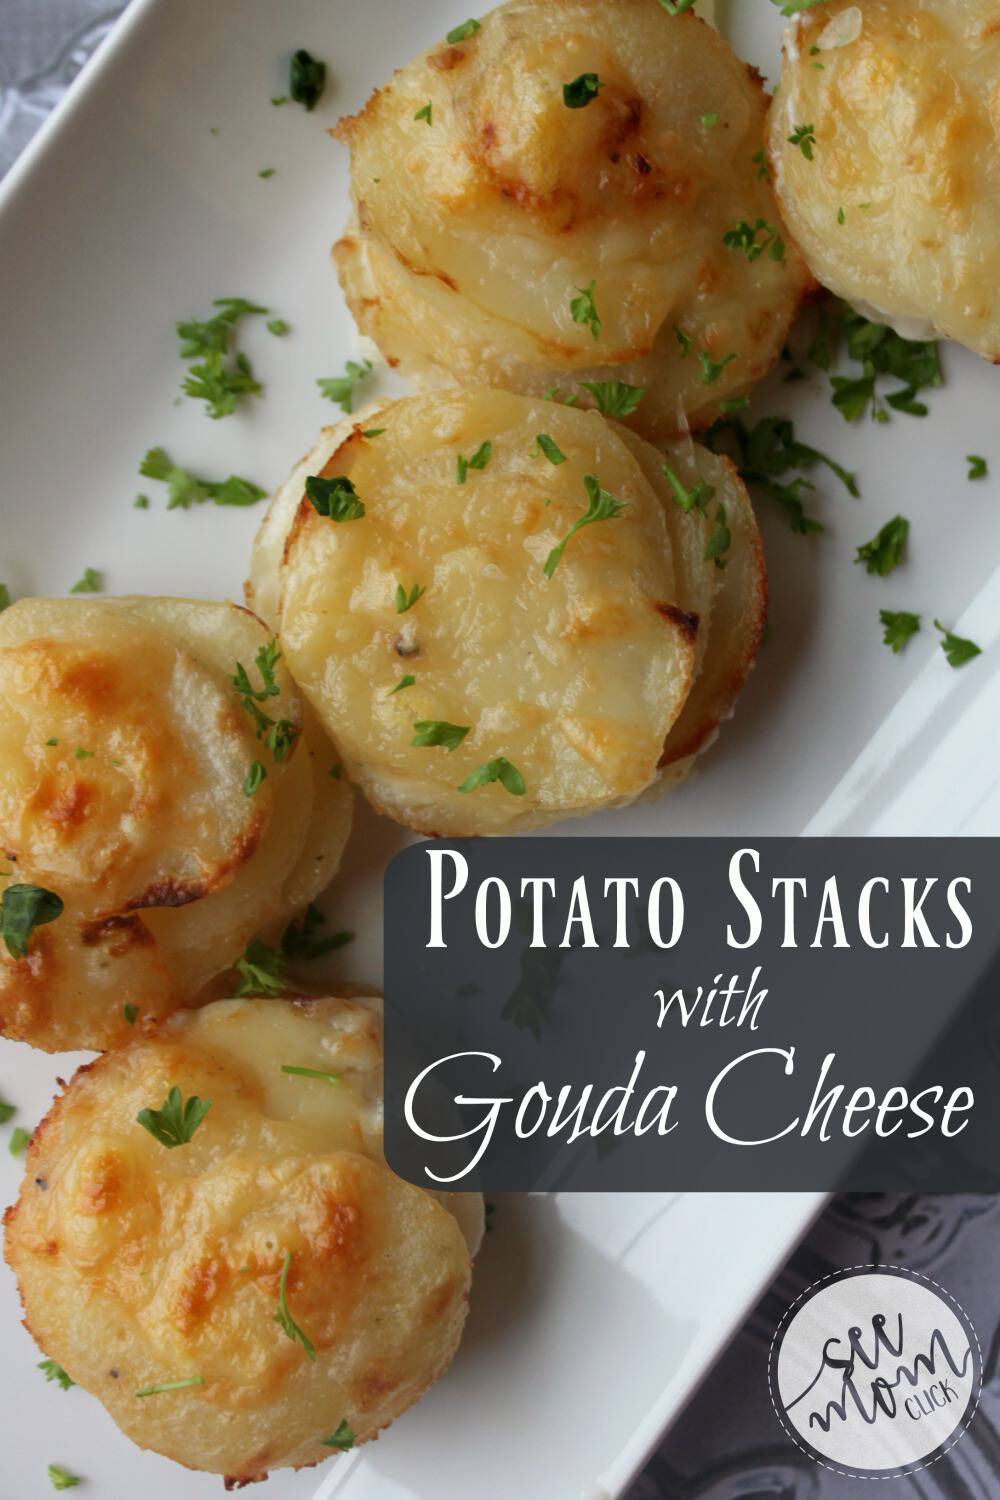 You truly won't believe how easy this Potato Stacks with Gouda Cheese Recipe is to make and how delicious it is with Wisconsin Cheese gouda! A perfect easy side dish recipe, especially for my fellow potato lovers! 